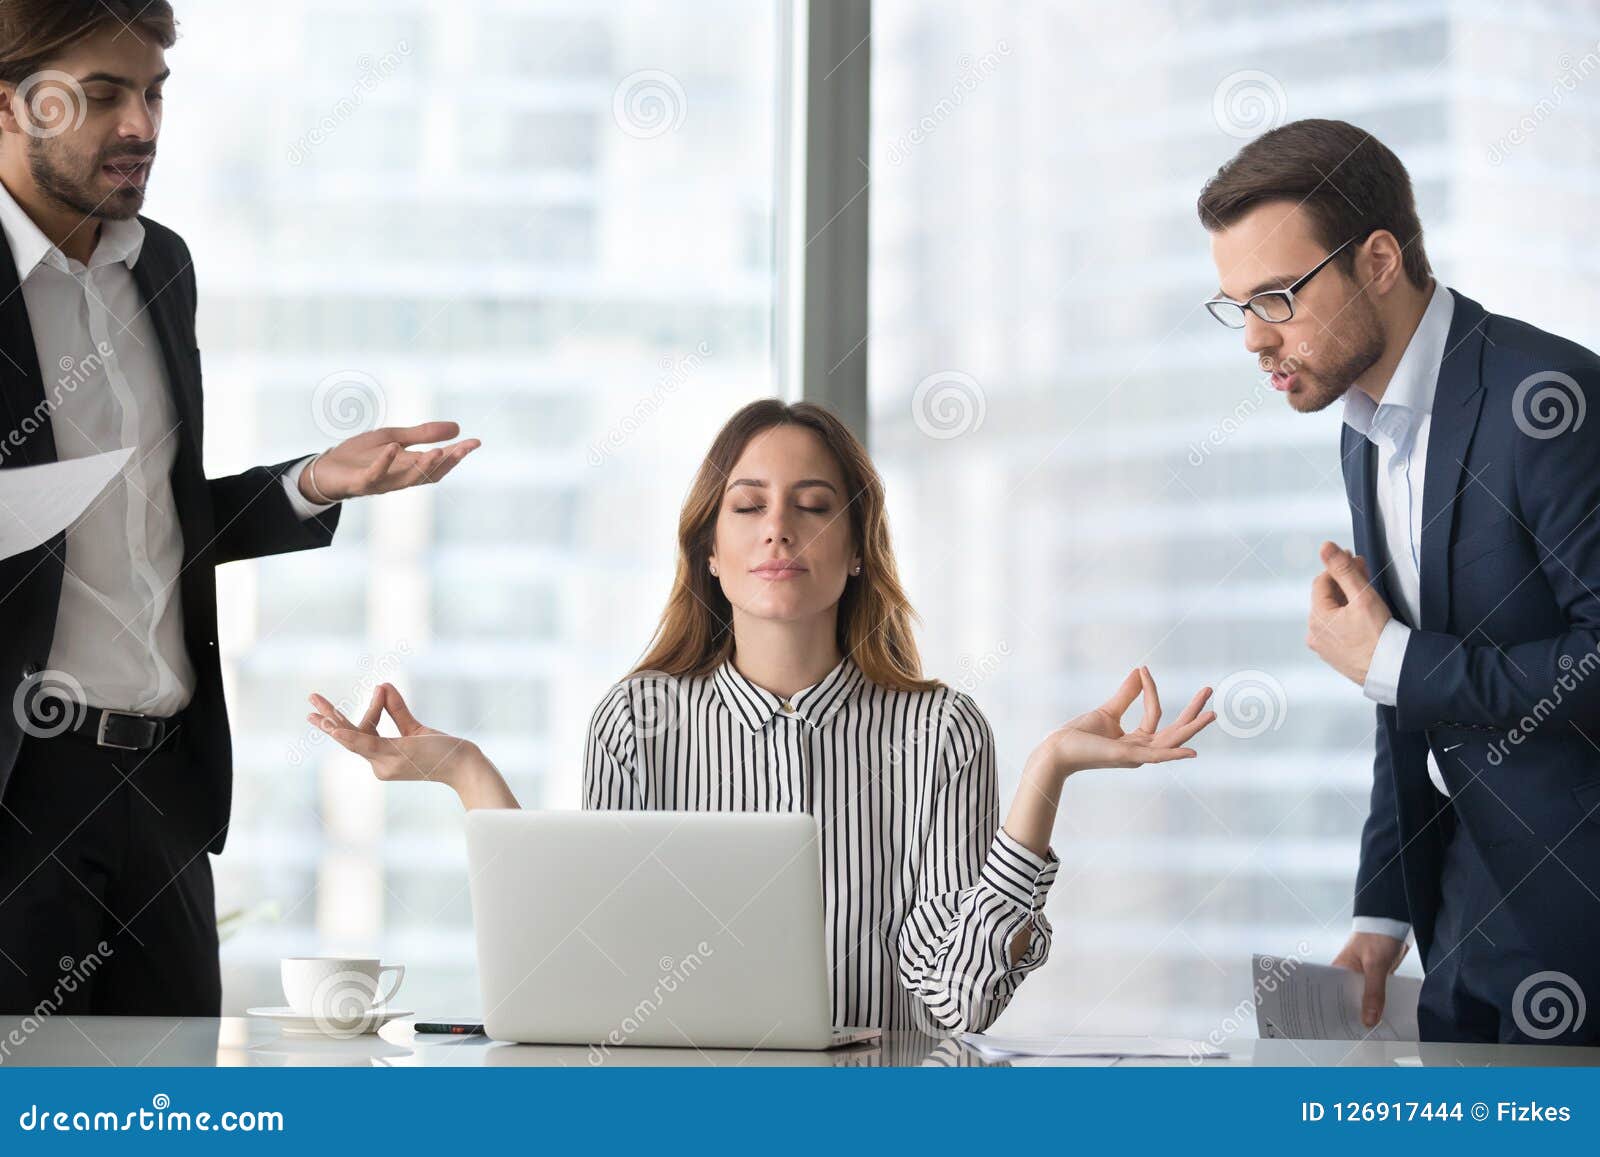 calm female managing stress at workplace not involved in fights